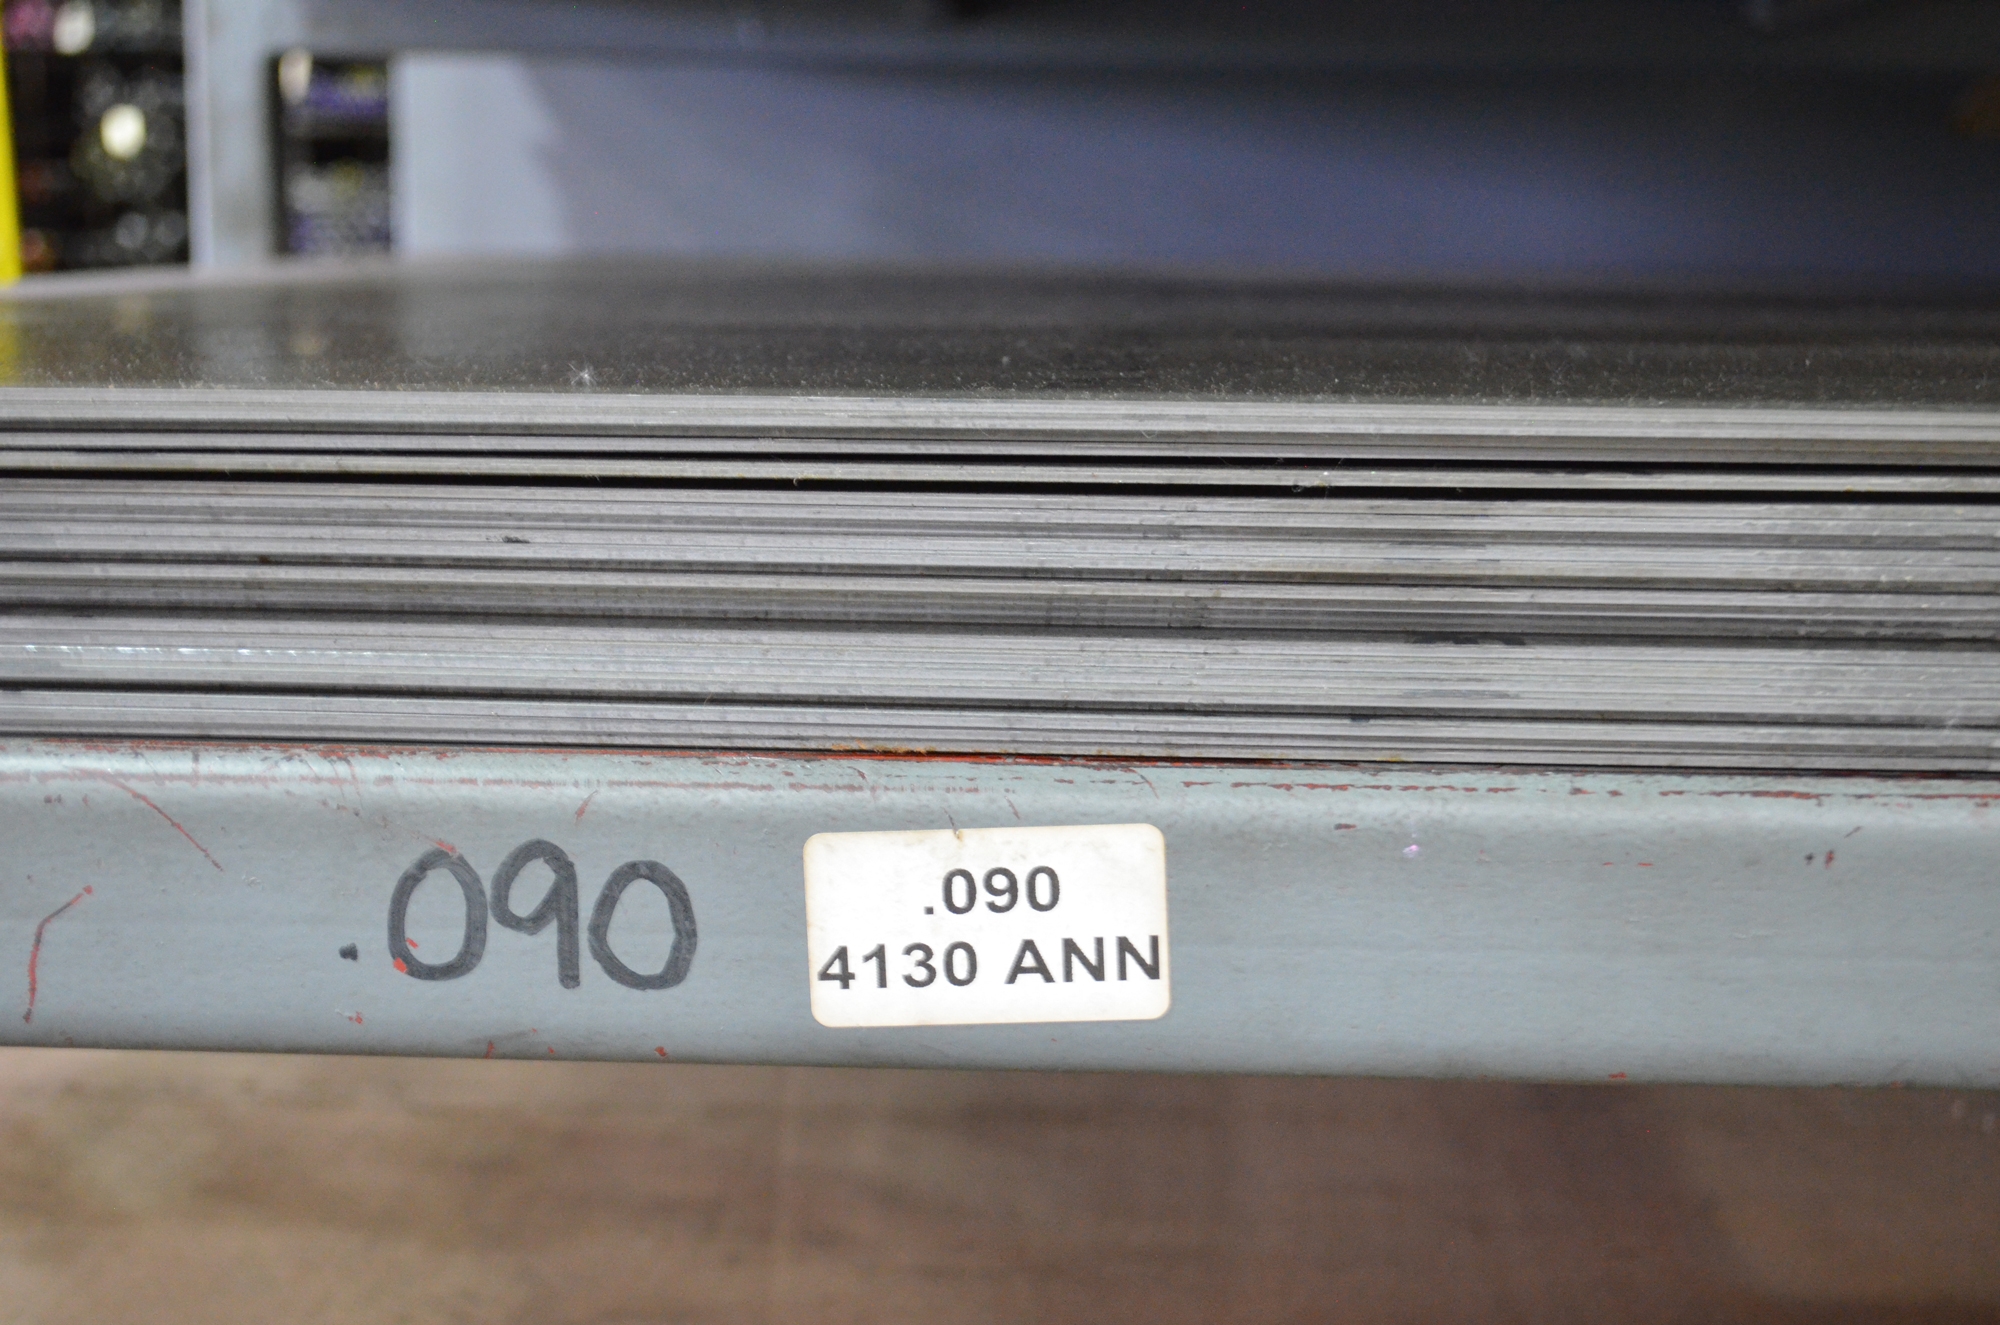 Alloy 4130 Annealed AMS-6350 Chromoly Steel Sheet Qty of 1 .120 x 12 x 36 